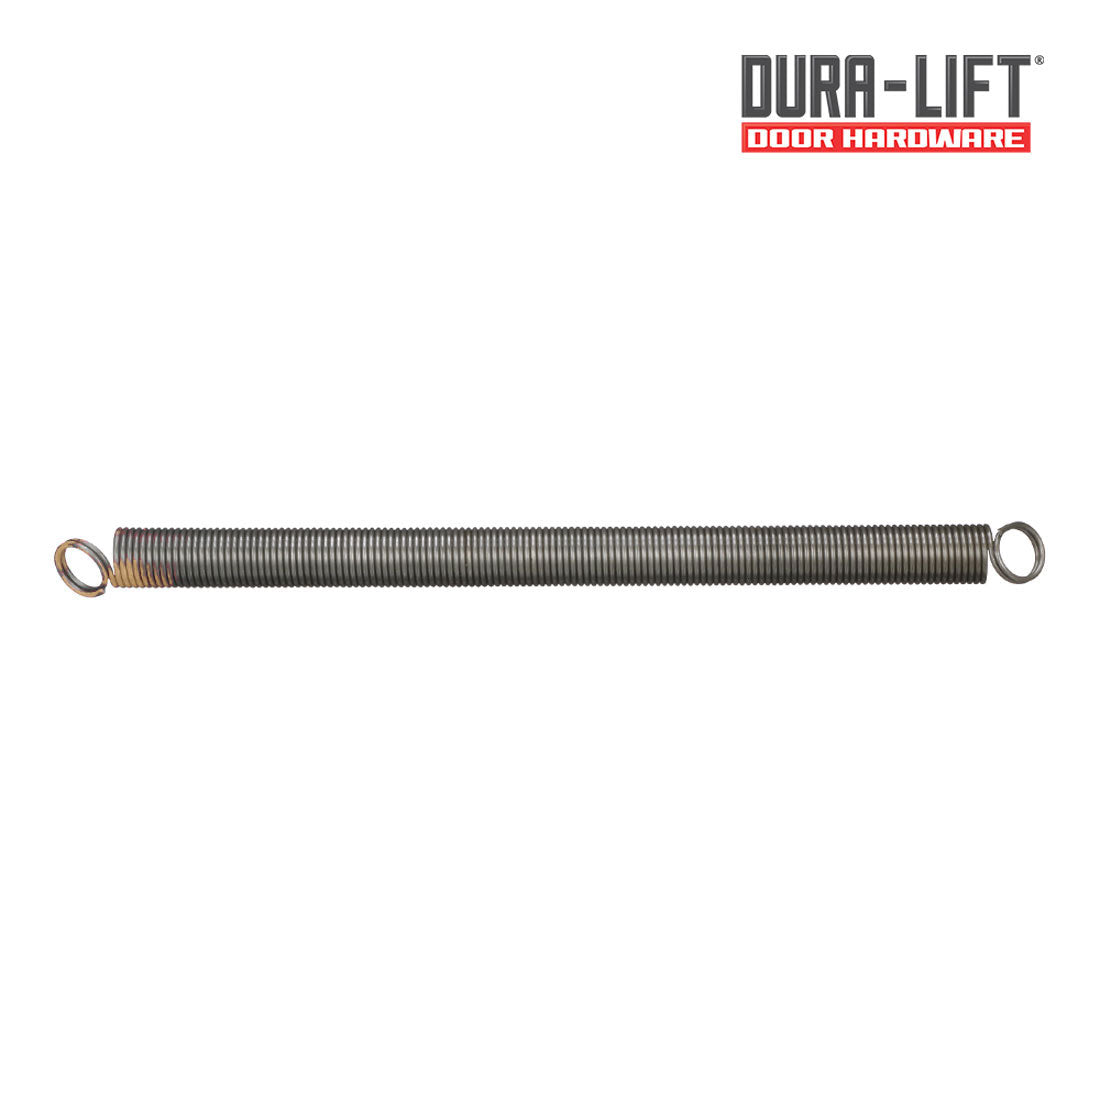 DURA-LIFT 100 lb Heavy-Duty Doubled-Looped Garage Door Extension Spring (2-Pack)